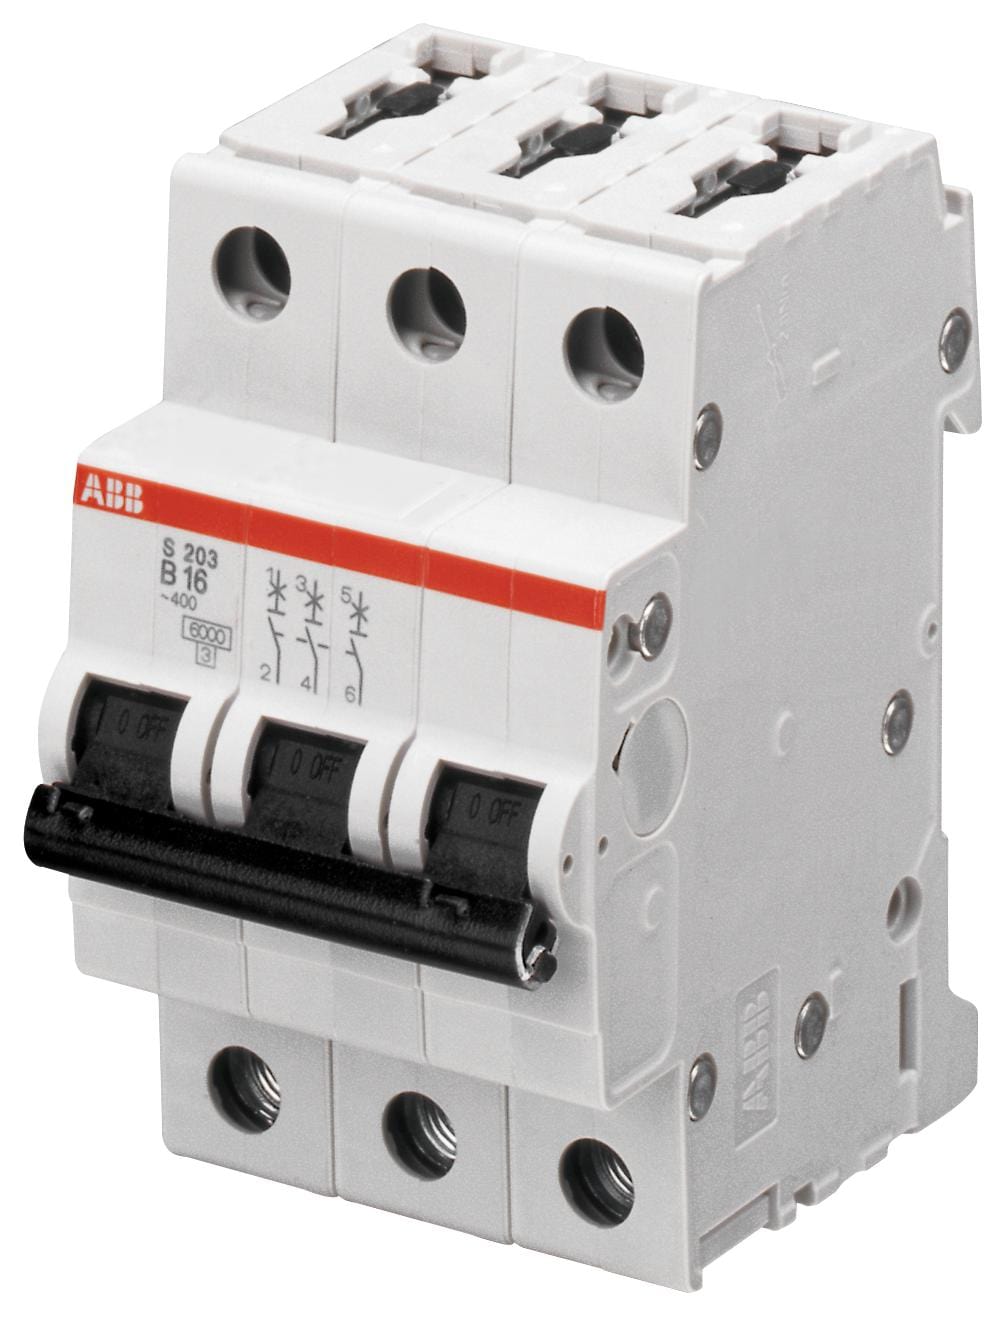 ABB Thermal Magnetic S203-D40 CIRCUIT BREAKER, THERMAL MAG, 3 POLE ABB 2492844 S203-D40